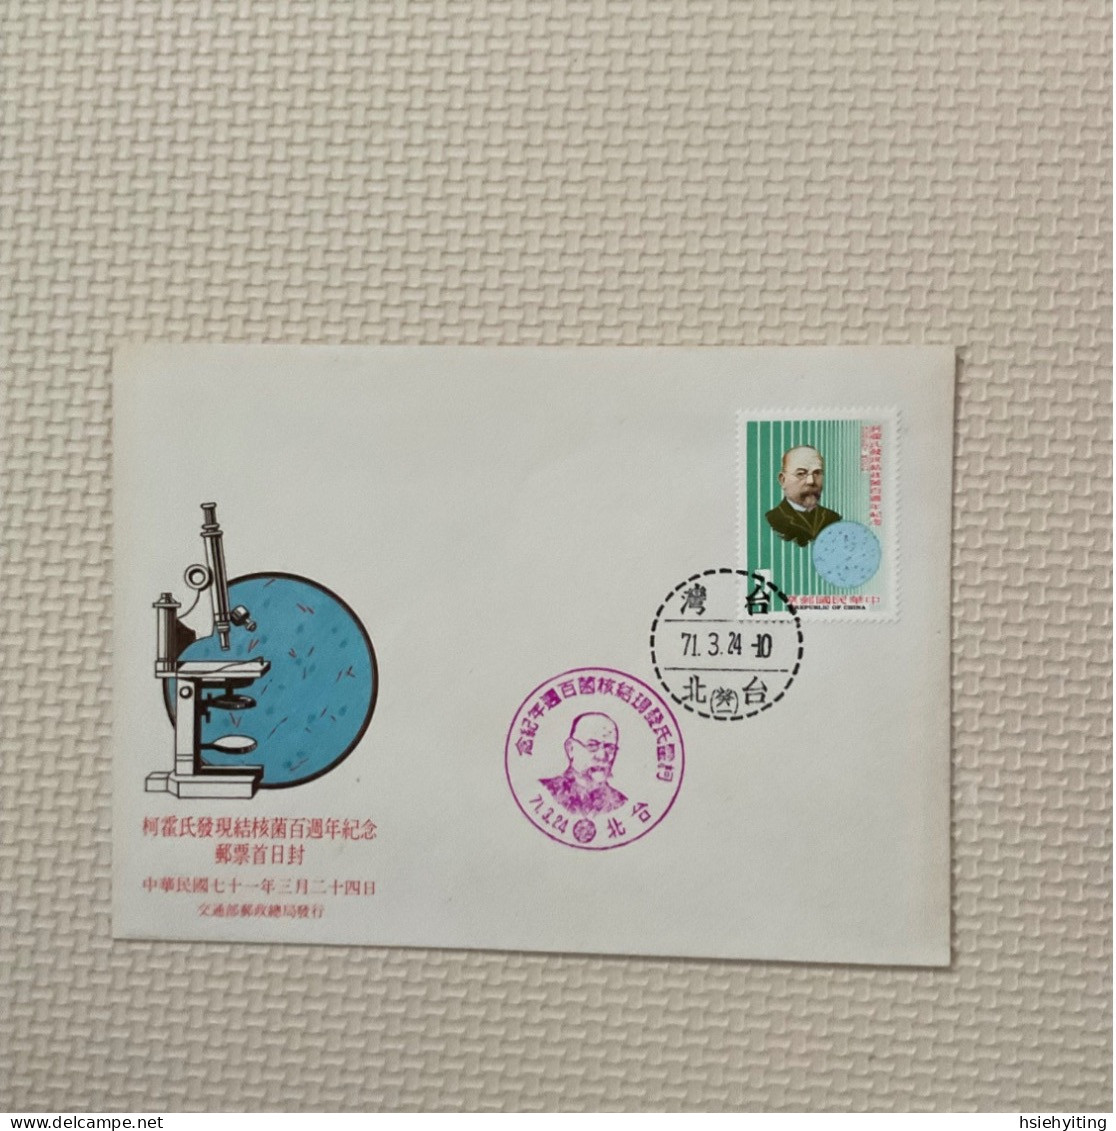 Taiwan Postage Stamps - Chemie